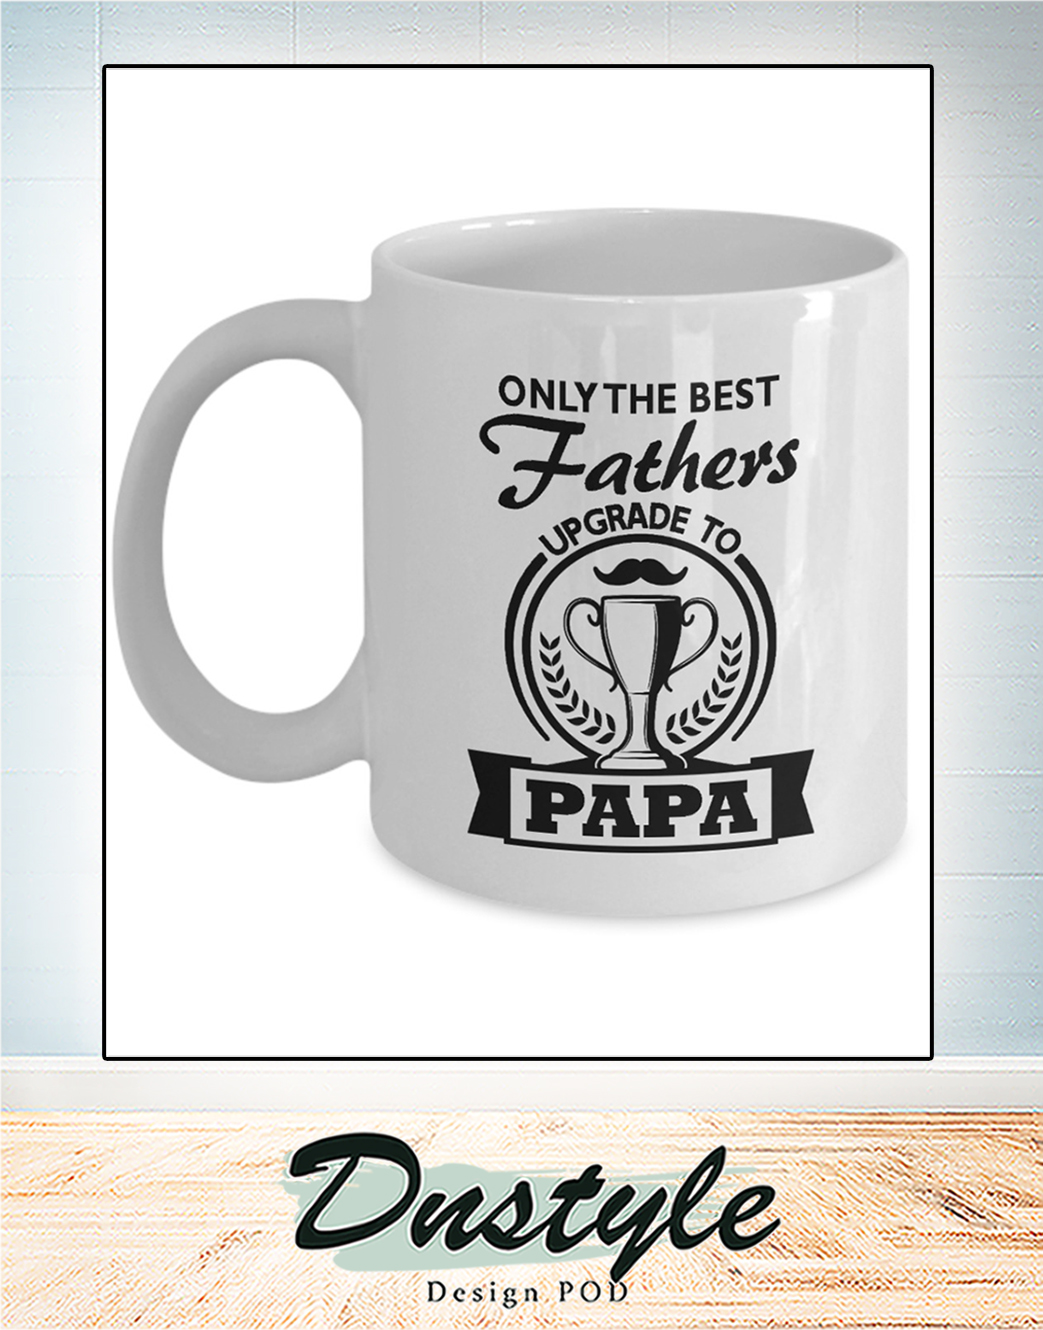 Only the best fathers upgrade to papa mug 1